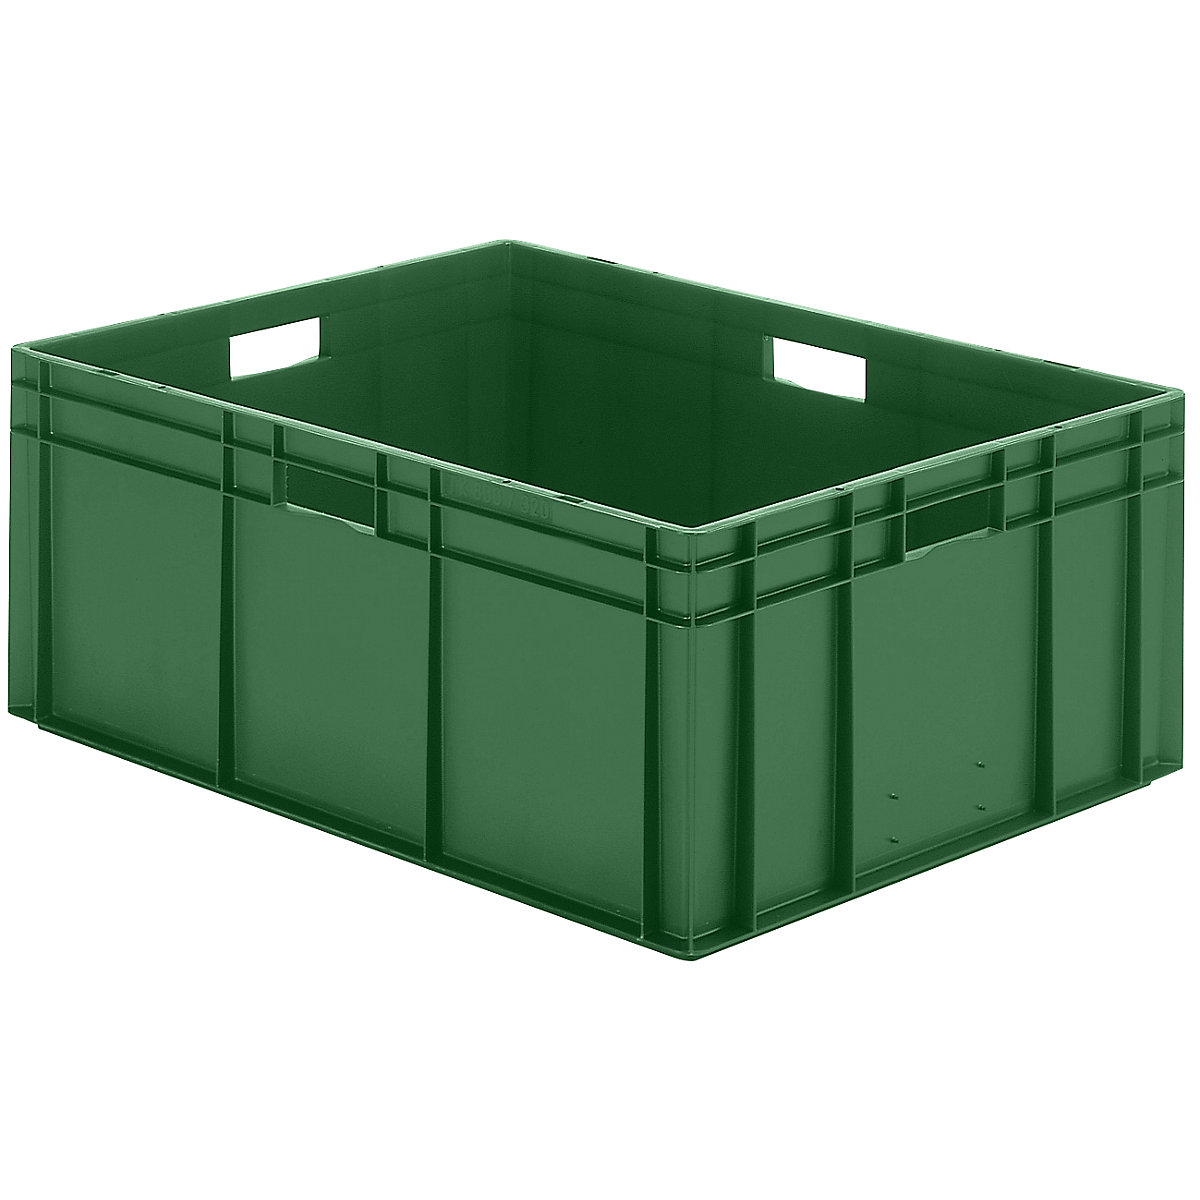 Euro stacking container, closed walls and base, LxWxH 800 x 600 x 320 mm, green, pack of 2